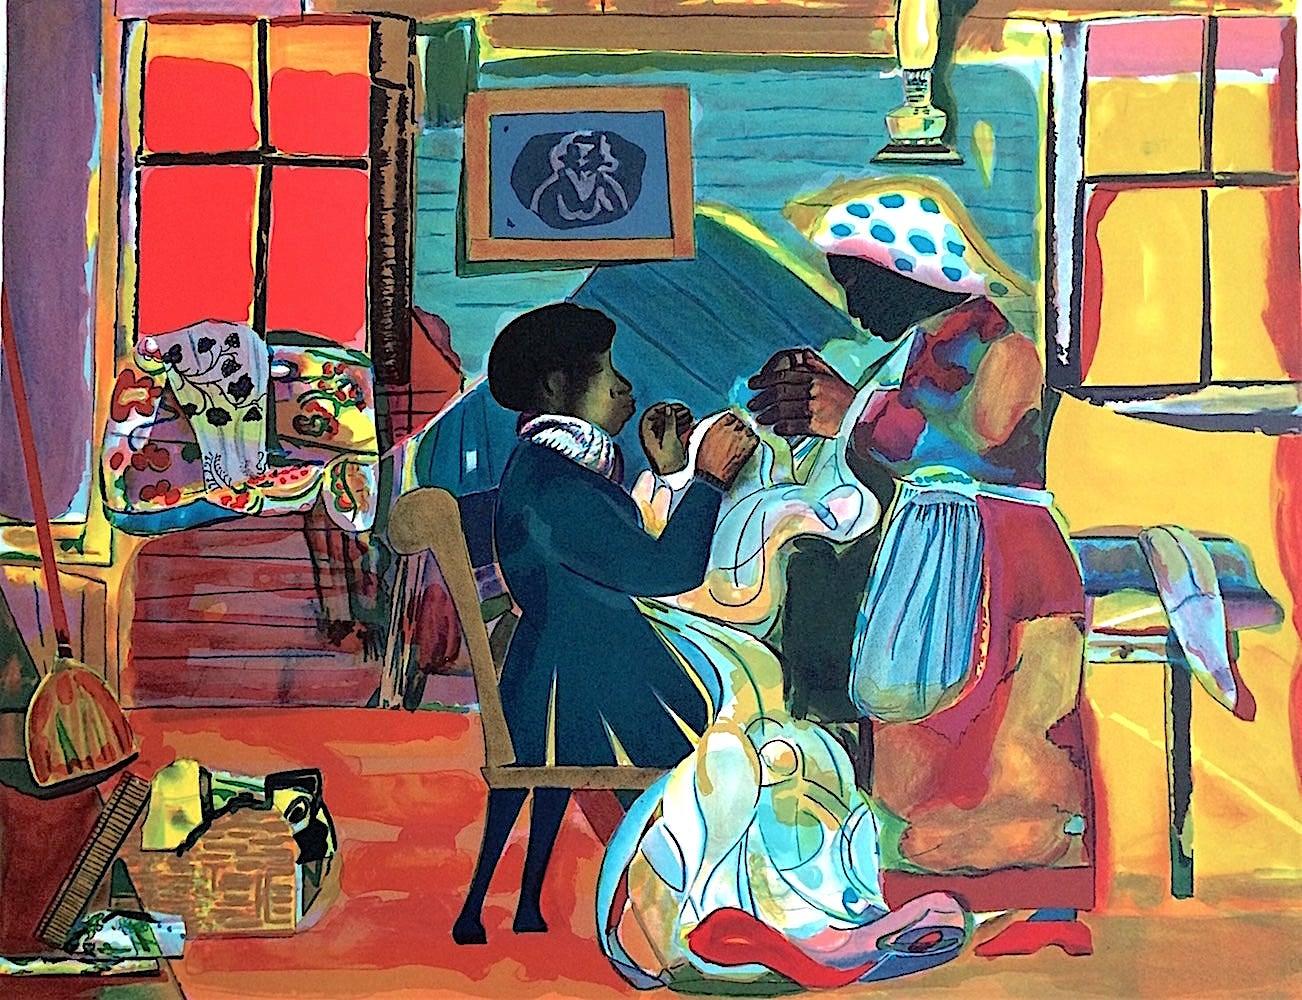 QUILTING TIME Signed Lithograph, African American Culture, Interior Scene, Quilt - Print by Romare Bearden